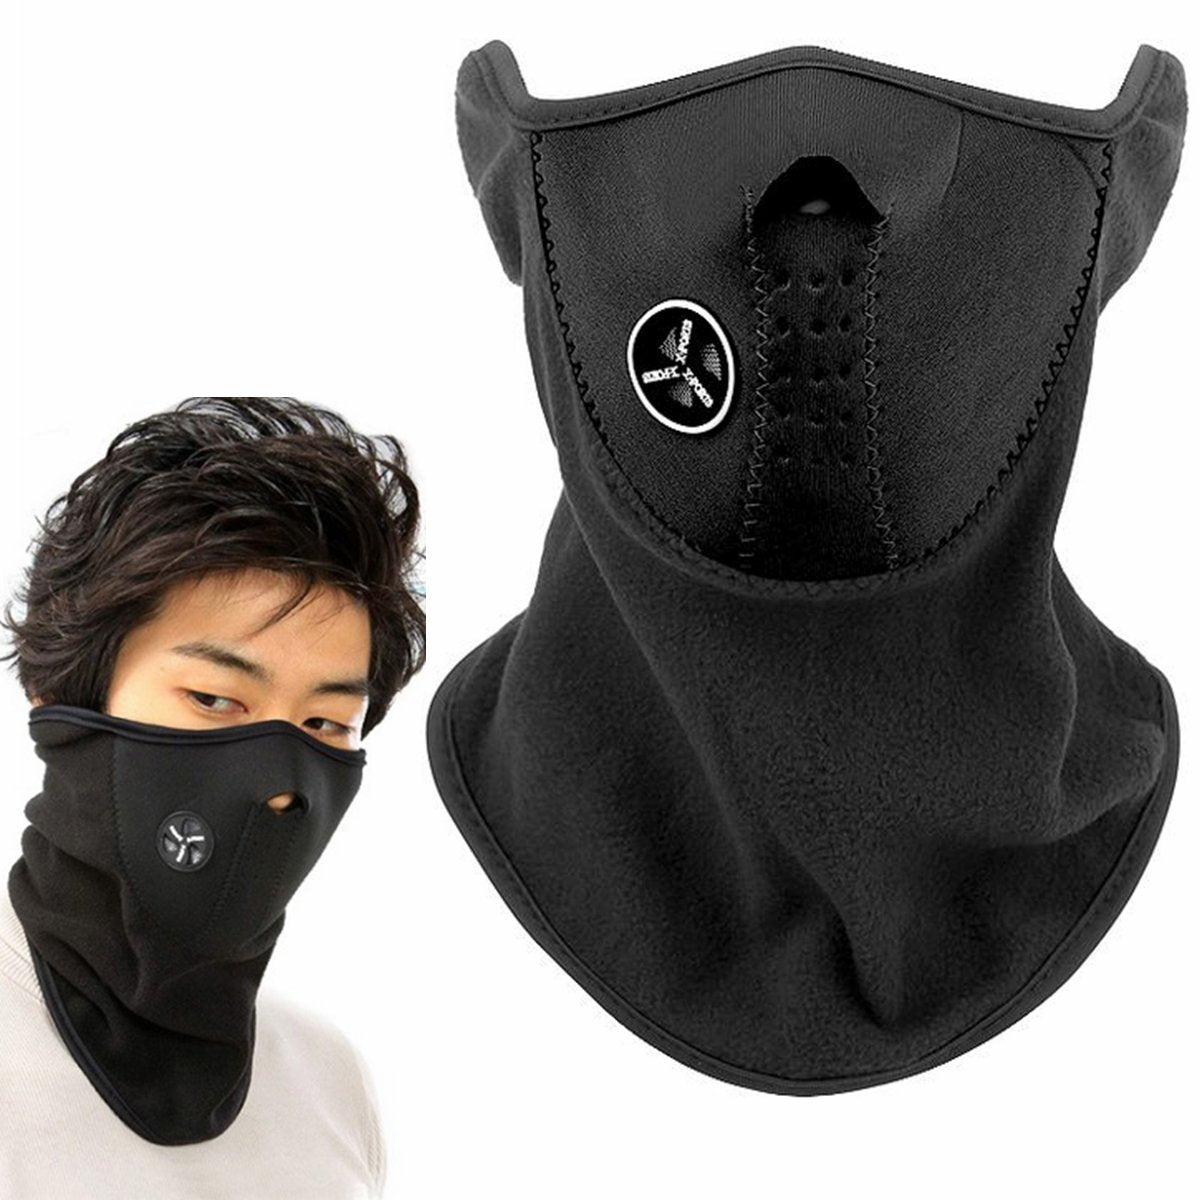 Biker Half Face Mask for Motorcycle Riding - Dust Wind Shield Cover Neck  Gaiter